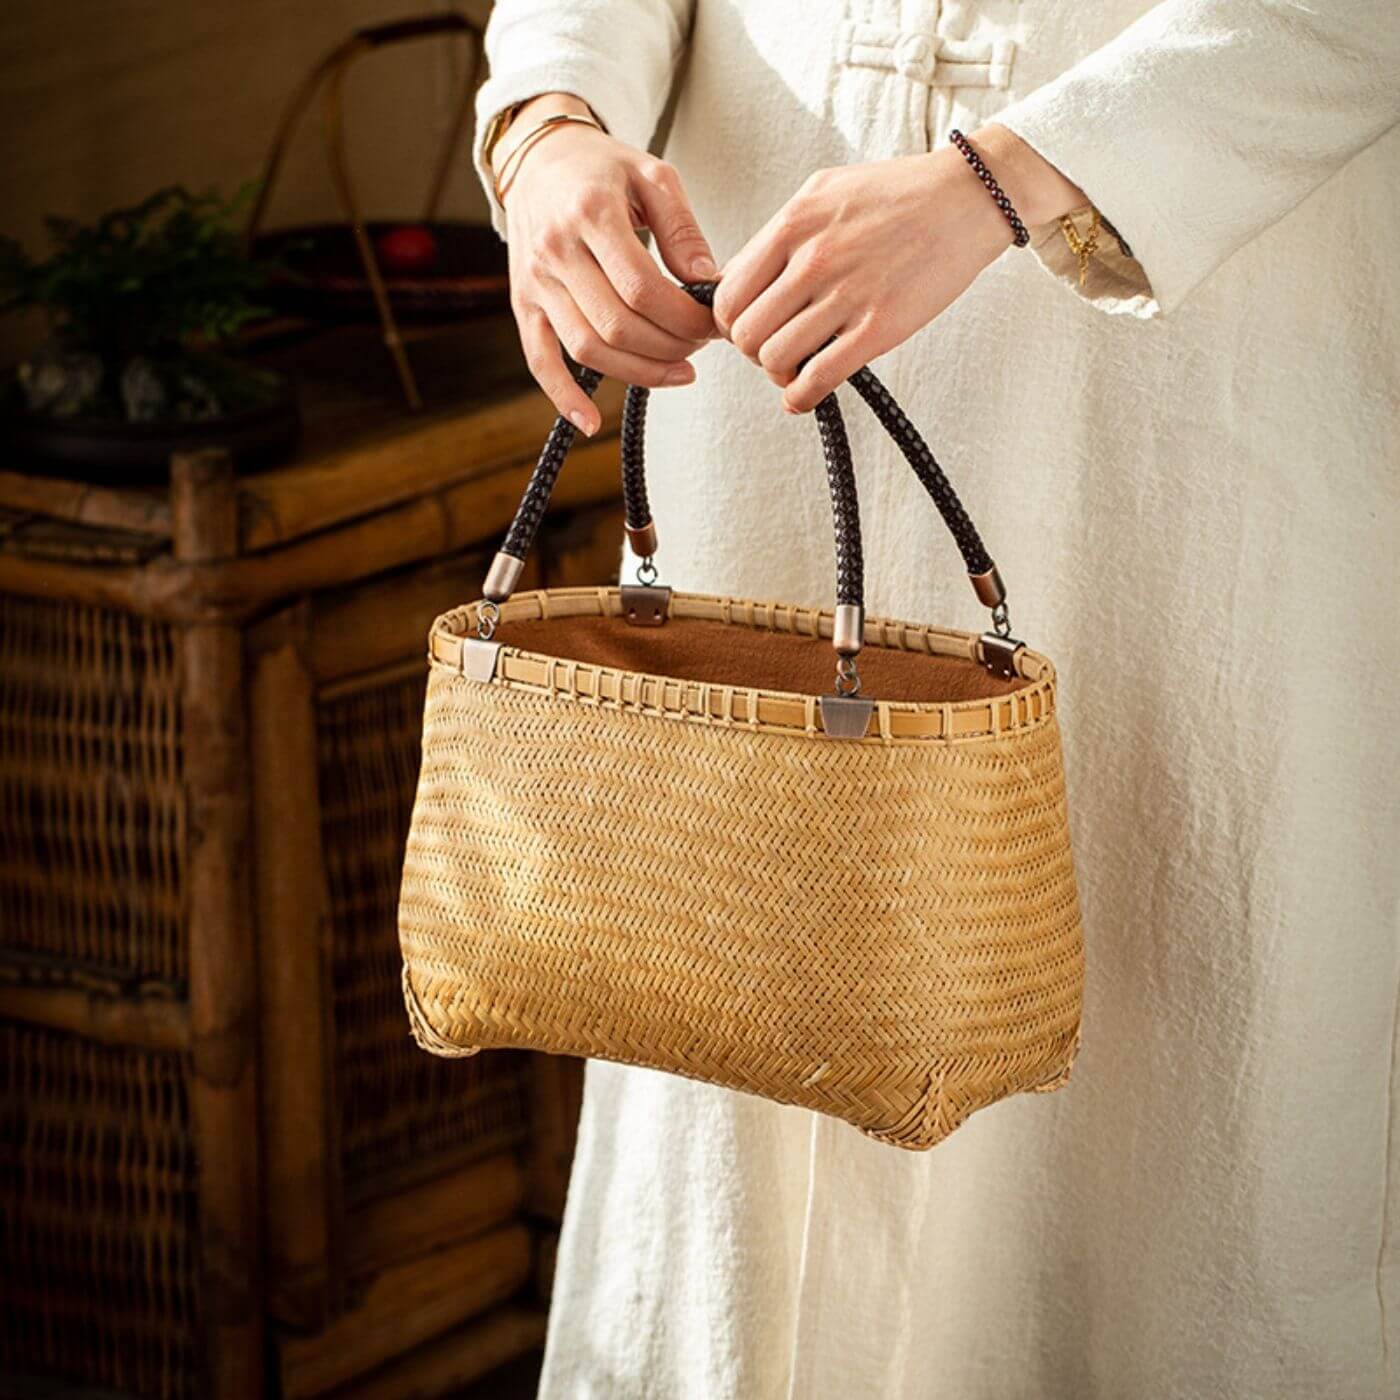 Chinese Bamboo-woven Handmade Picnic Bag100% handmade Chinese bamboo woven bags. No matter, if you want to take it to a picnic, pick flowers, or just carry your belongings when commuting, this bag, will ensure you catch the eye.